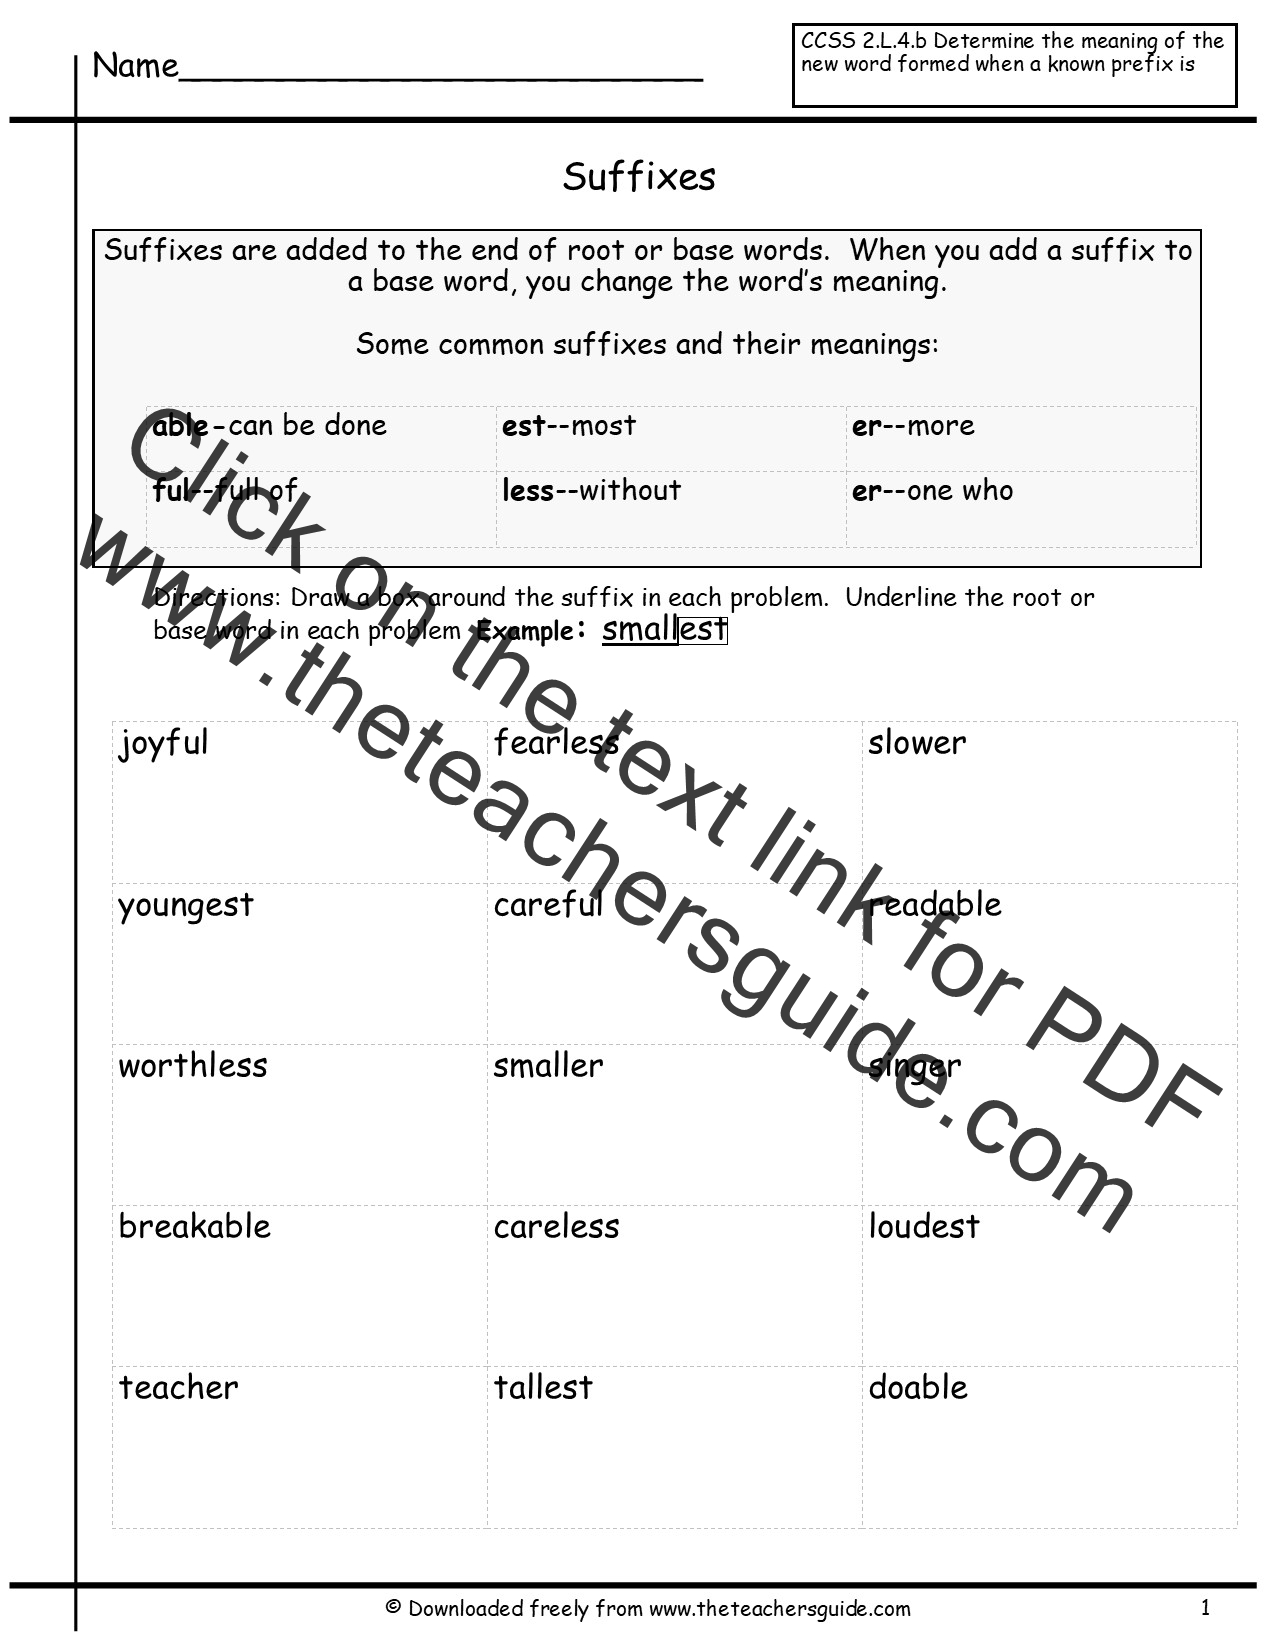 verb-suffixes-in-2021-how-to-memorize-things-suffixes-anchor-chart-verb